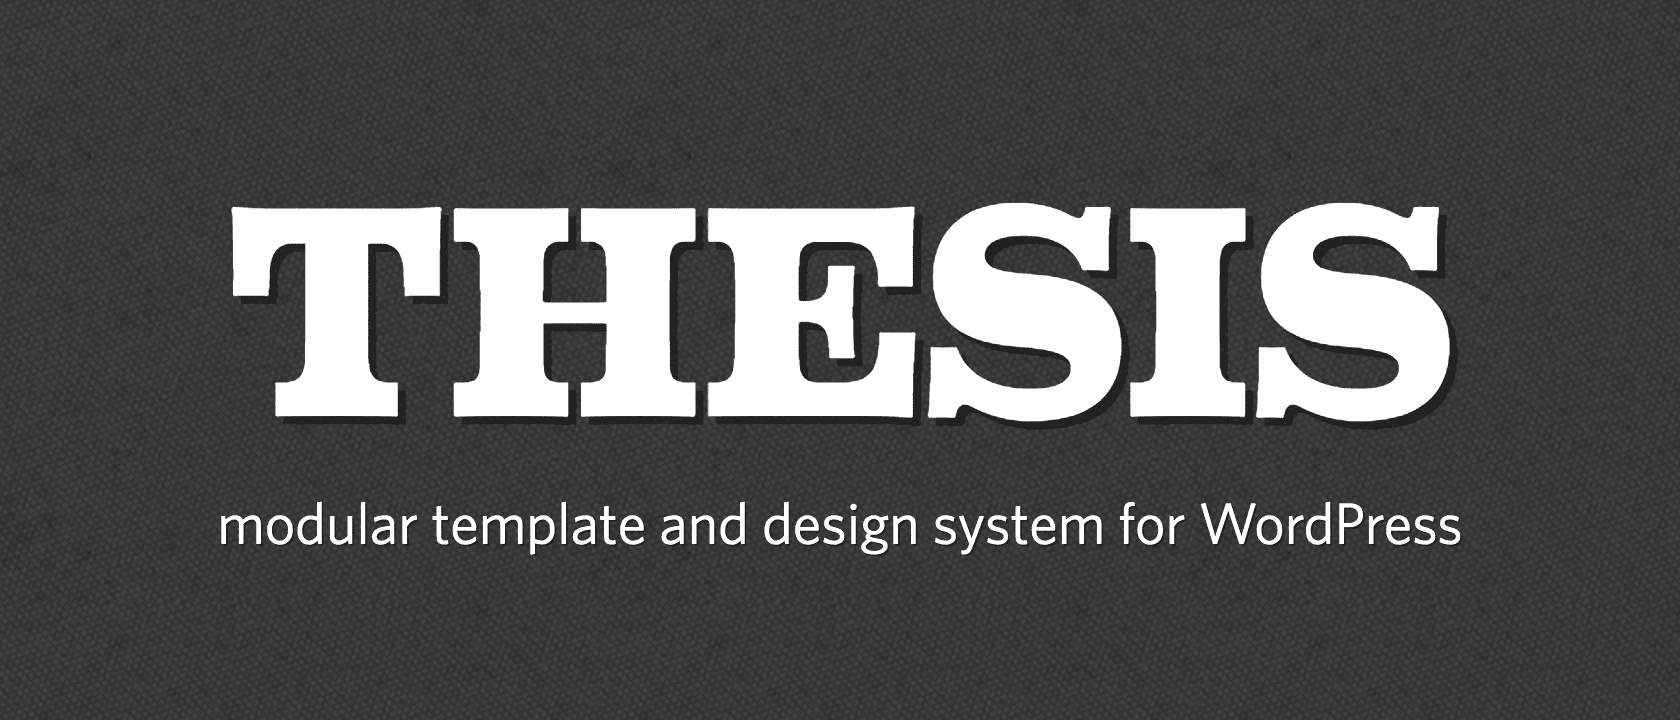 Thesis: A Modular Template and Design System for WordPress